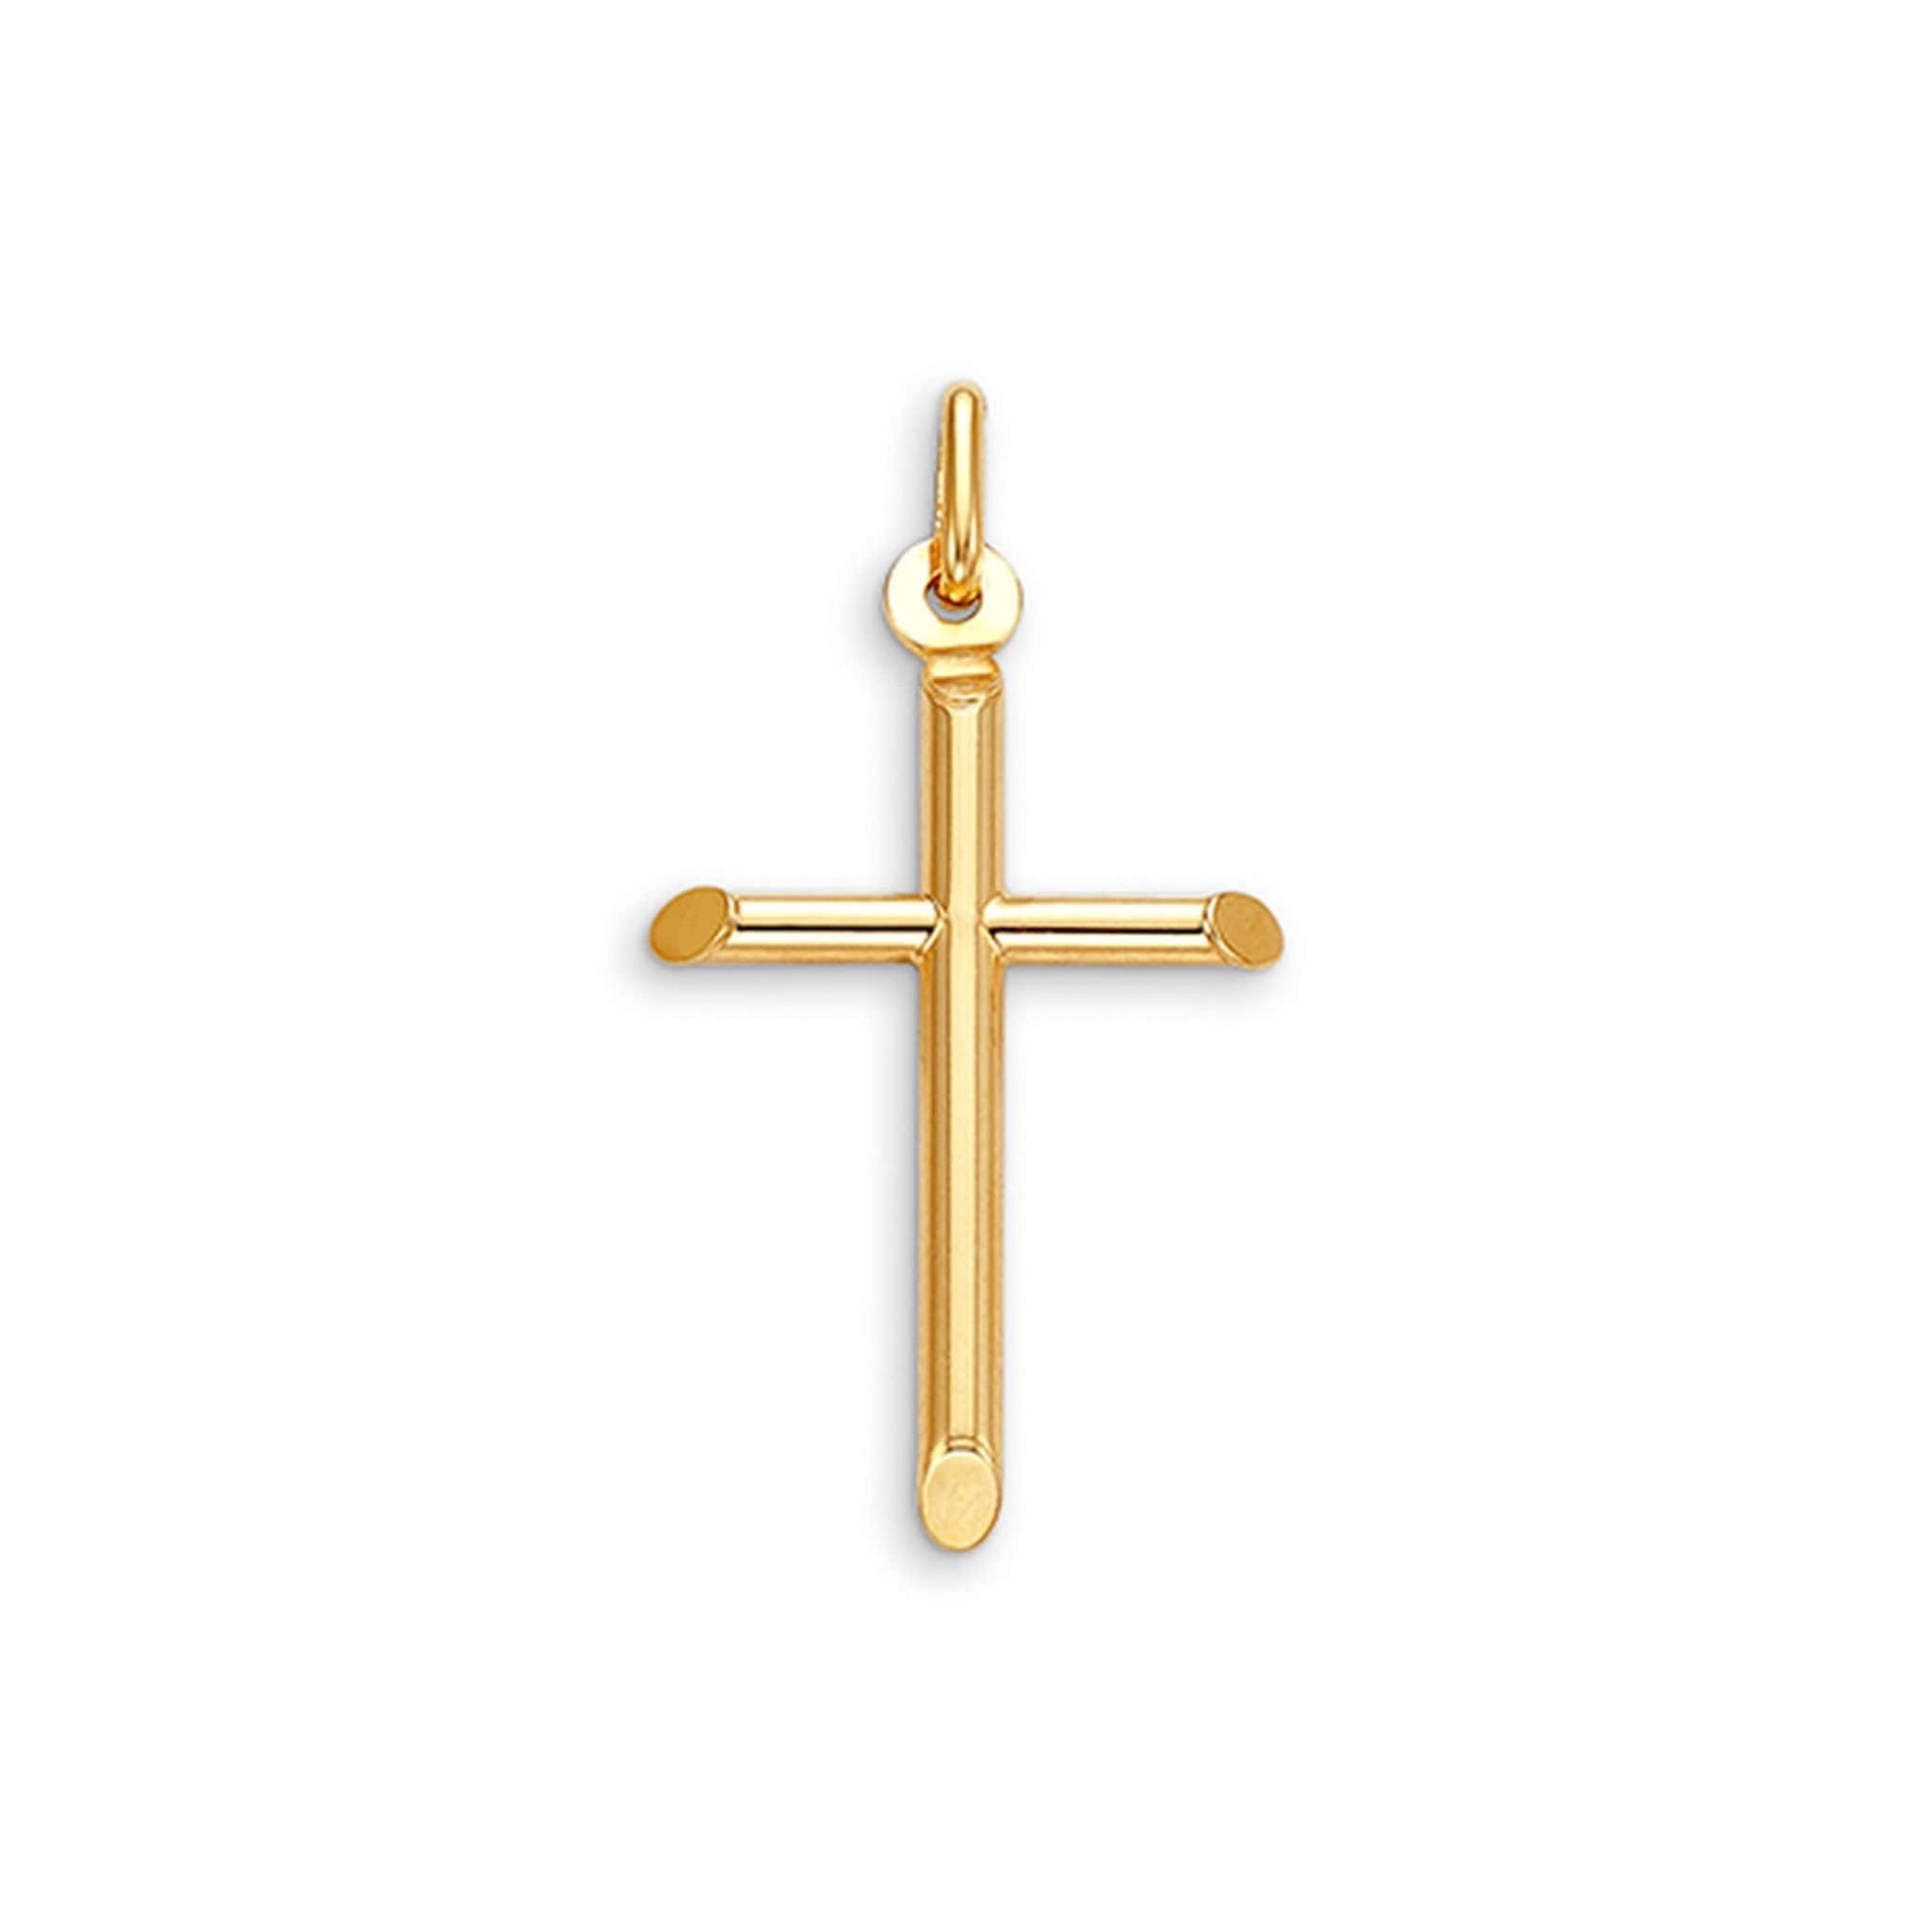 10K Simple Yellow Gold Small Cross Pendant at Arman's Jewellers